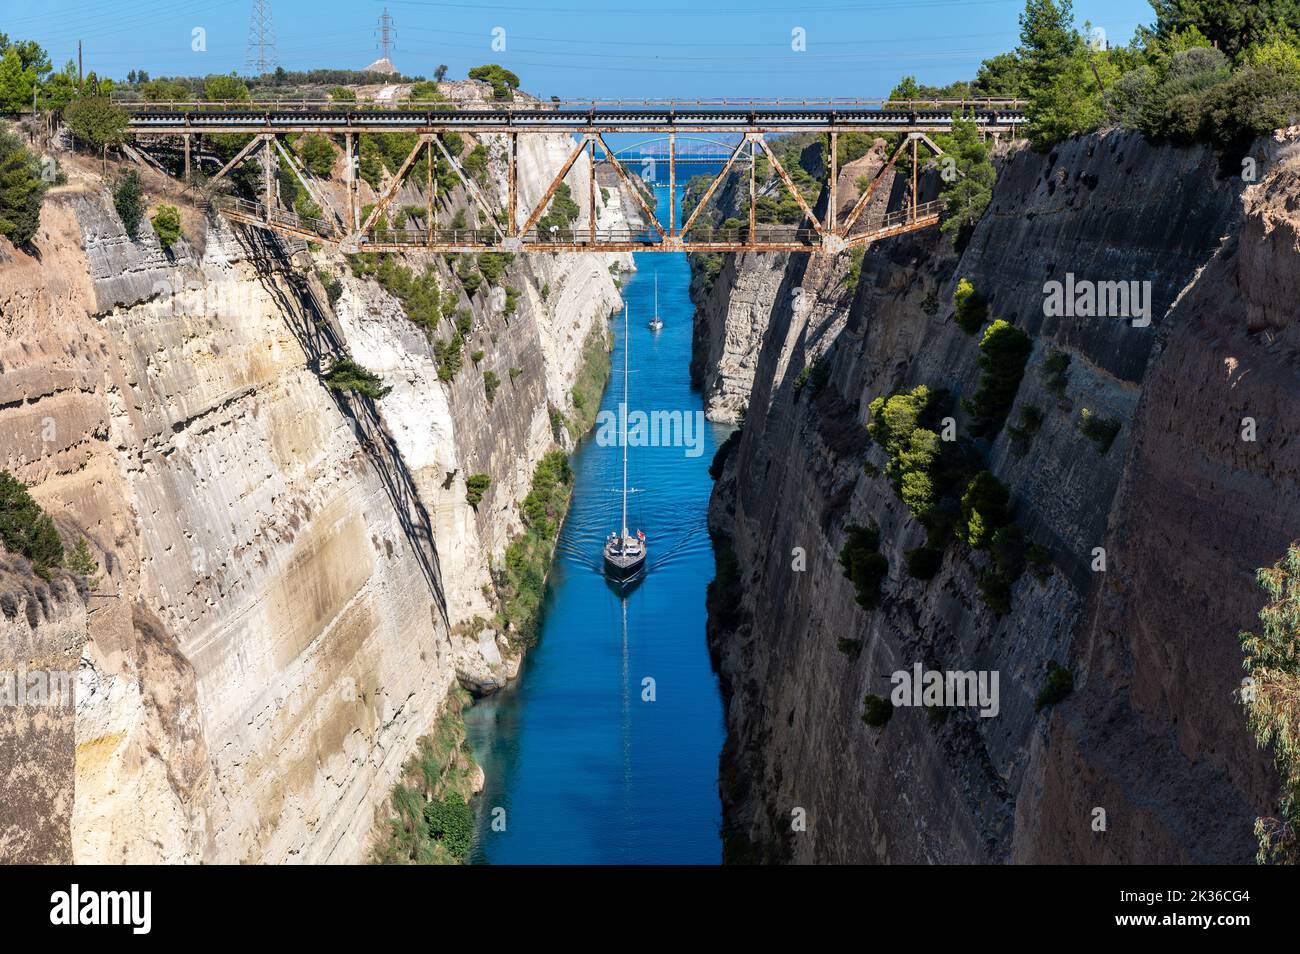 A boat sails through the very narrow Corinth Canal.The canal is connects the Gulf of Corinth in the Ionian Sea with the Saronic Gulf in the Aegean Sea. Stock Photo